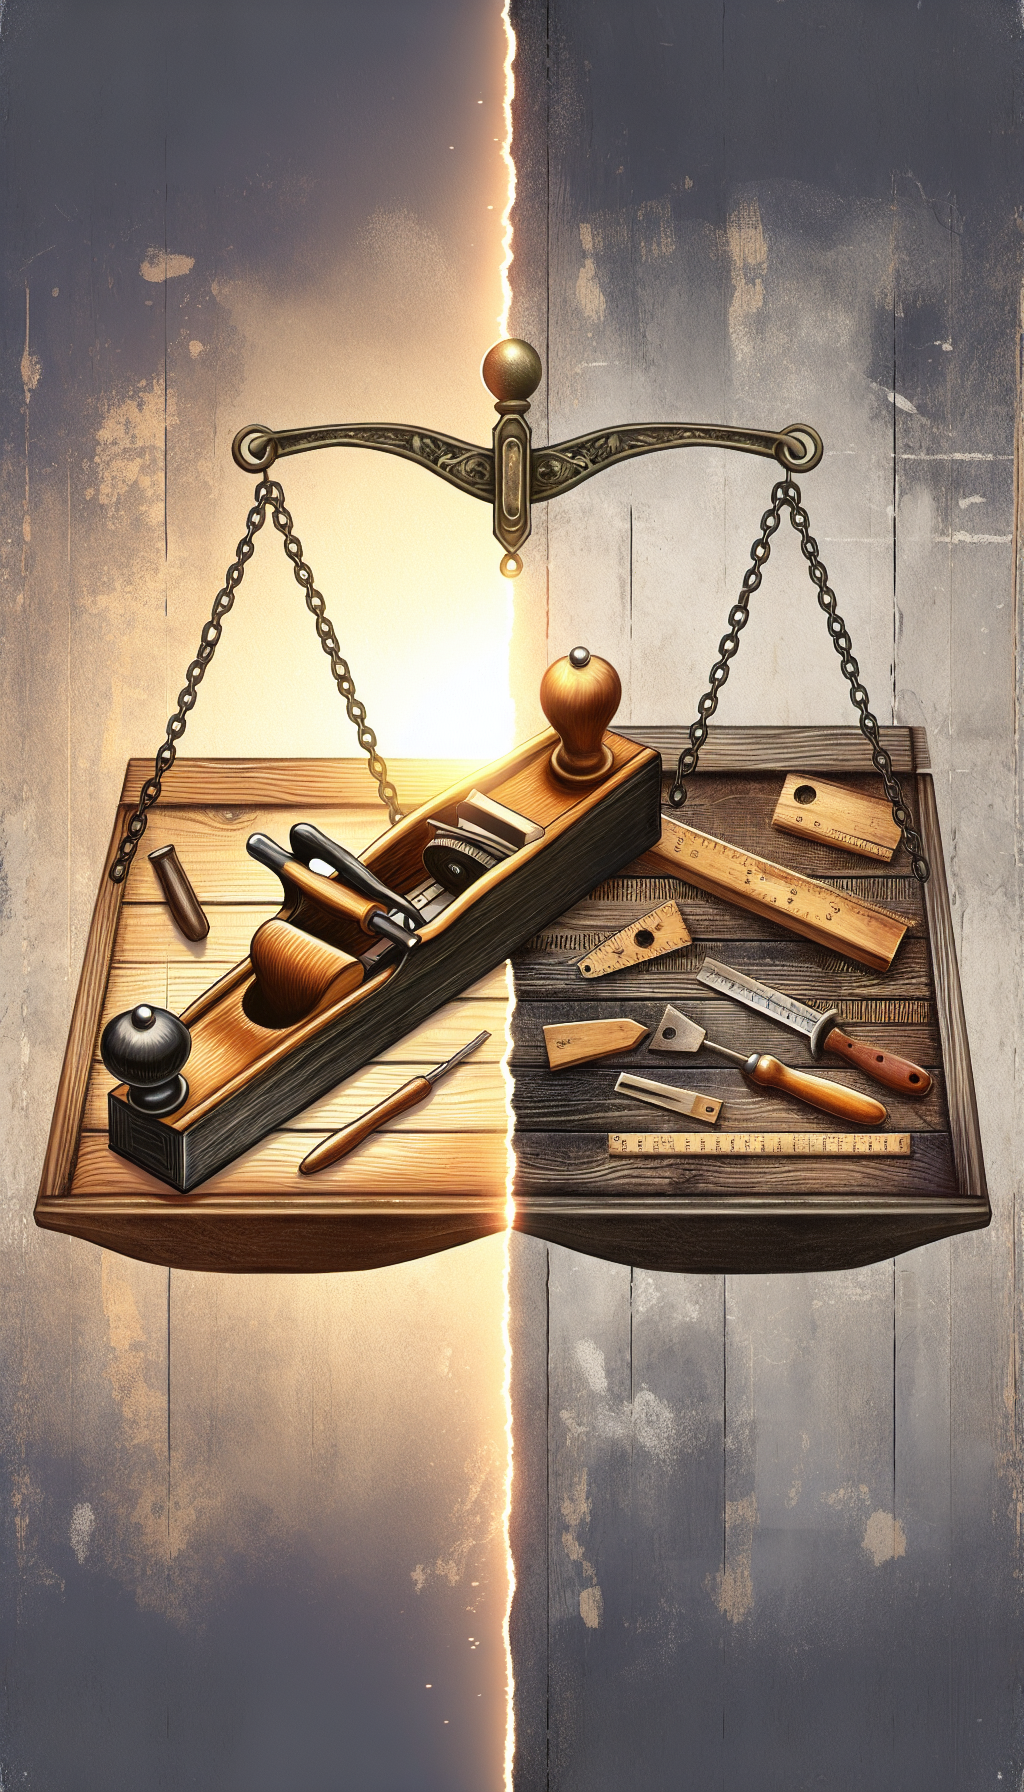 An illustration split down the middle, with one half showing a vibrant, restored antique wood planer with a glossy finish and price tag depicting high value. The other half displays an original, rustic planer with visible wear and a contrasting price tag, subtly implying its worth due to untouched authenticity. Above, a balance scale compares both, symbolizing the delicate valuation between restoration and originality.